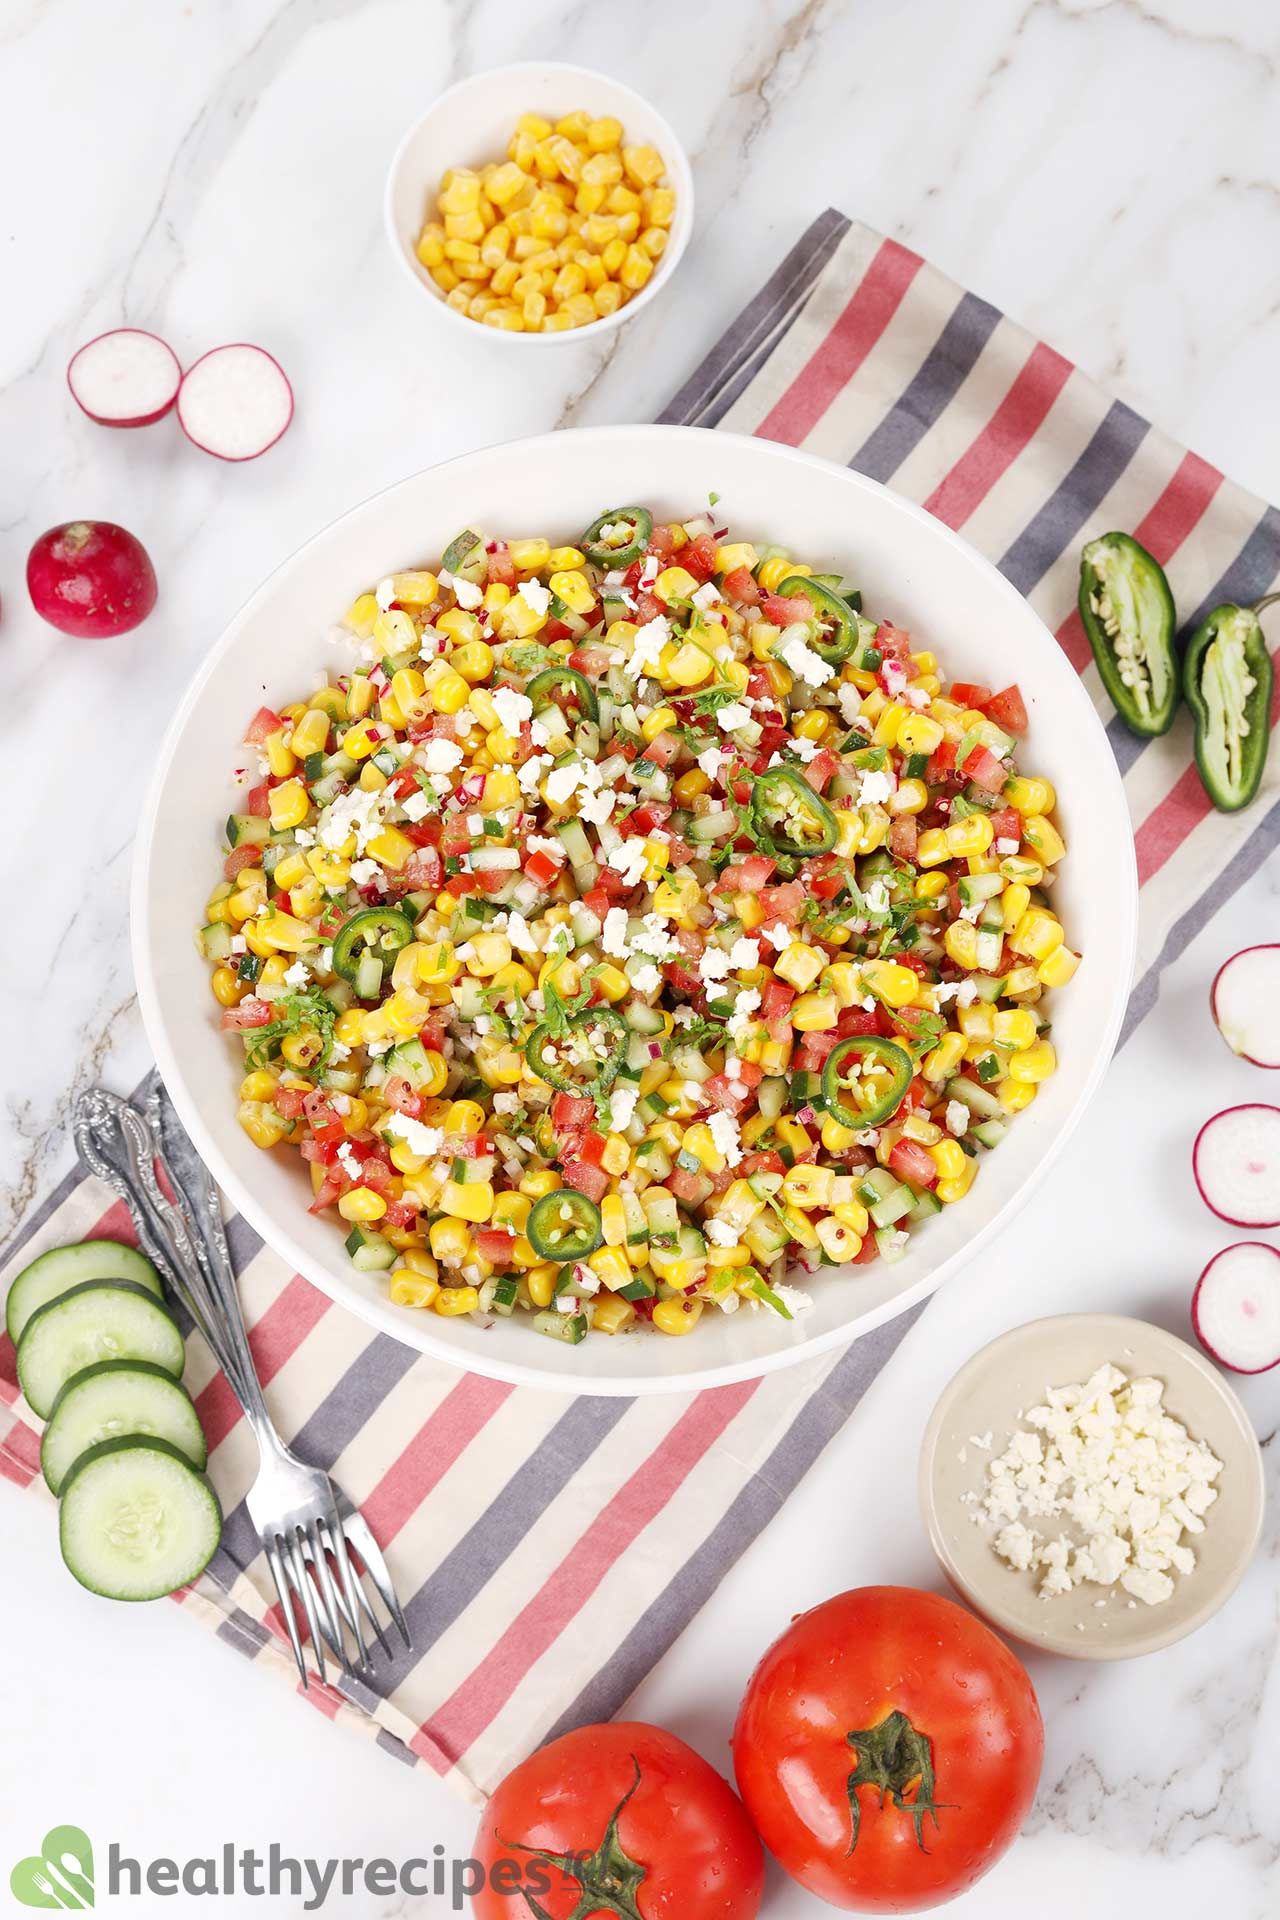 how to cook corn on the cob for corn salad